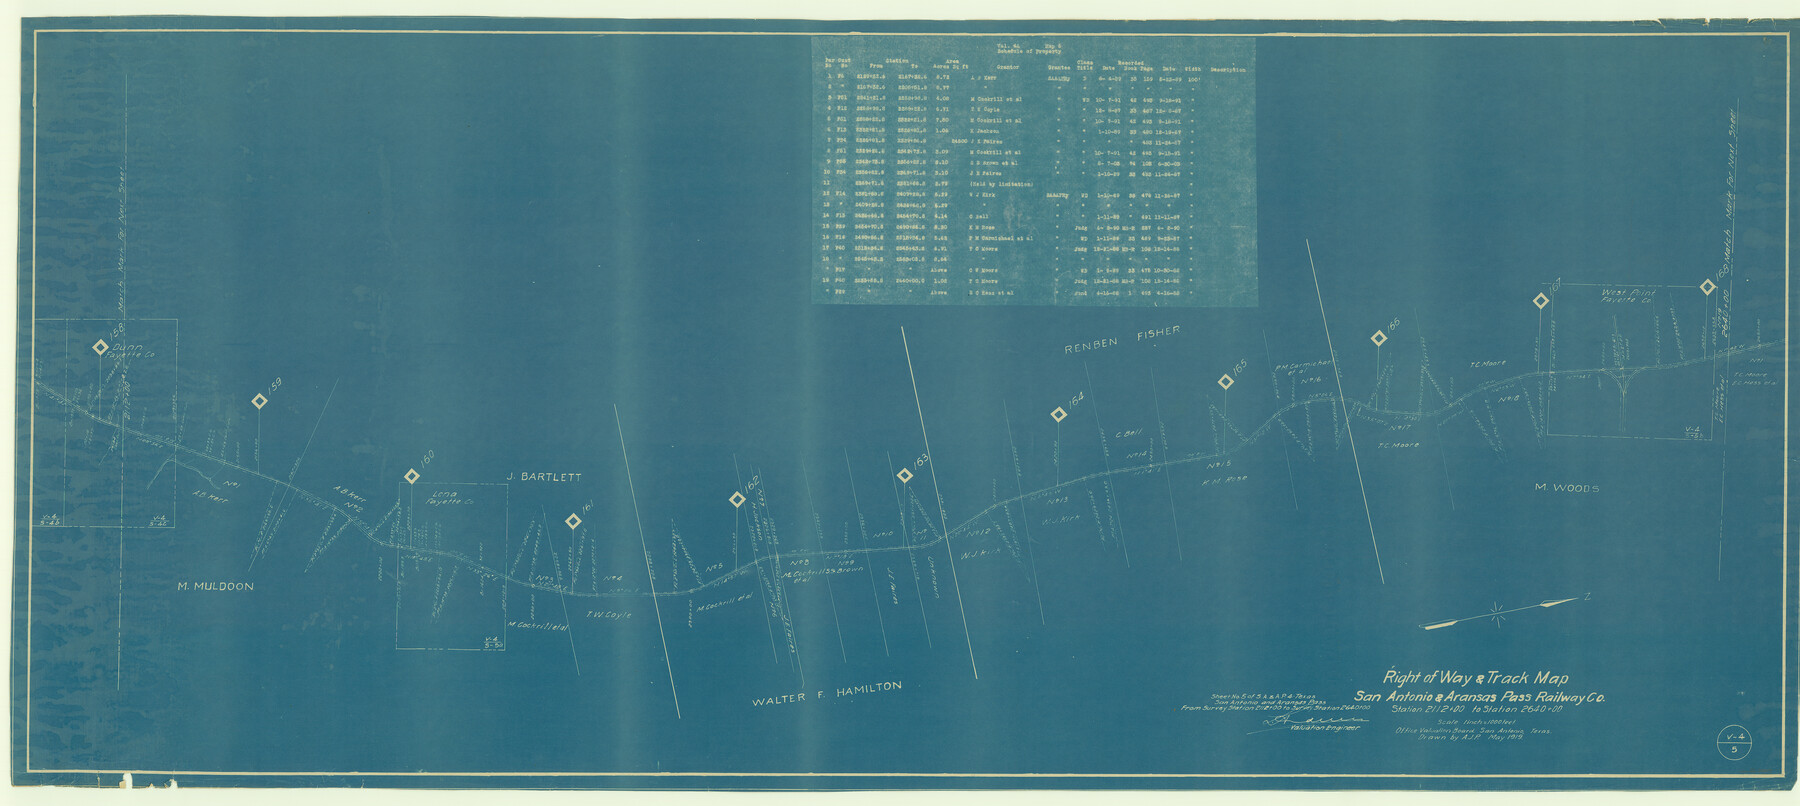 64217, Right of Way & Track Map, San Antonio & Aransas Pass Railway Co., General Map Collection